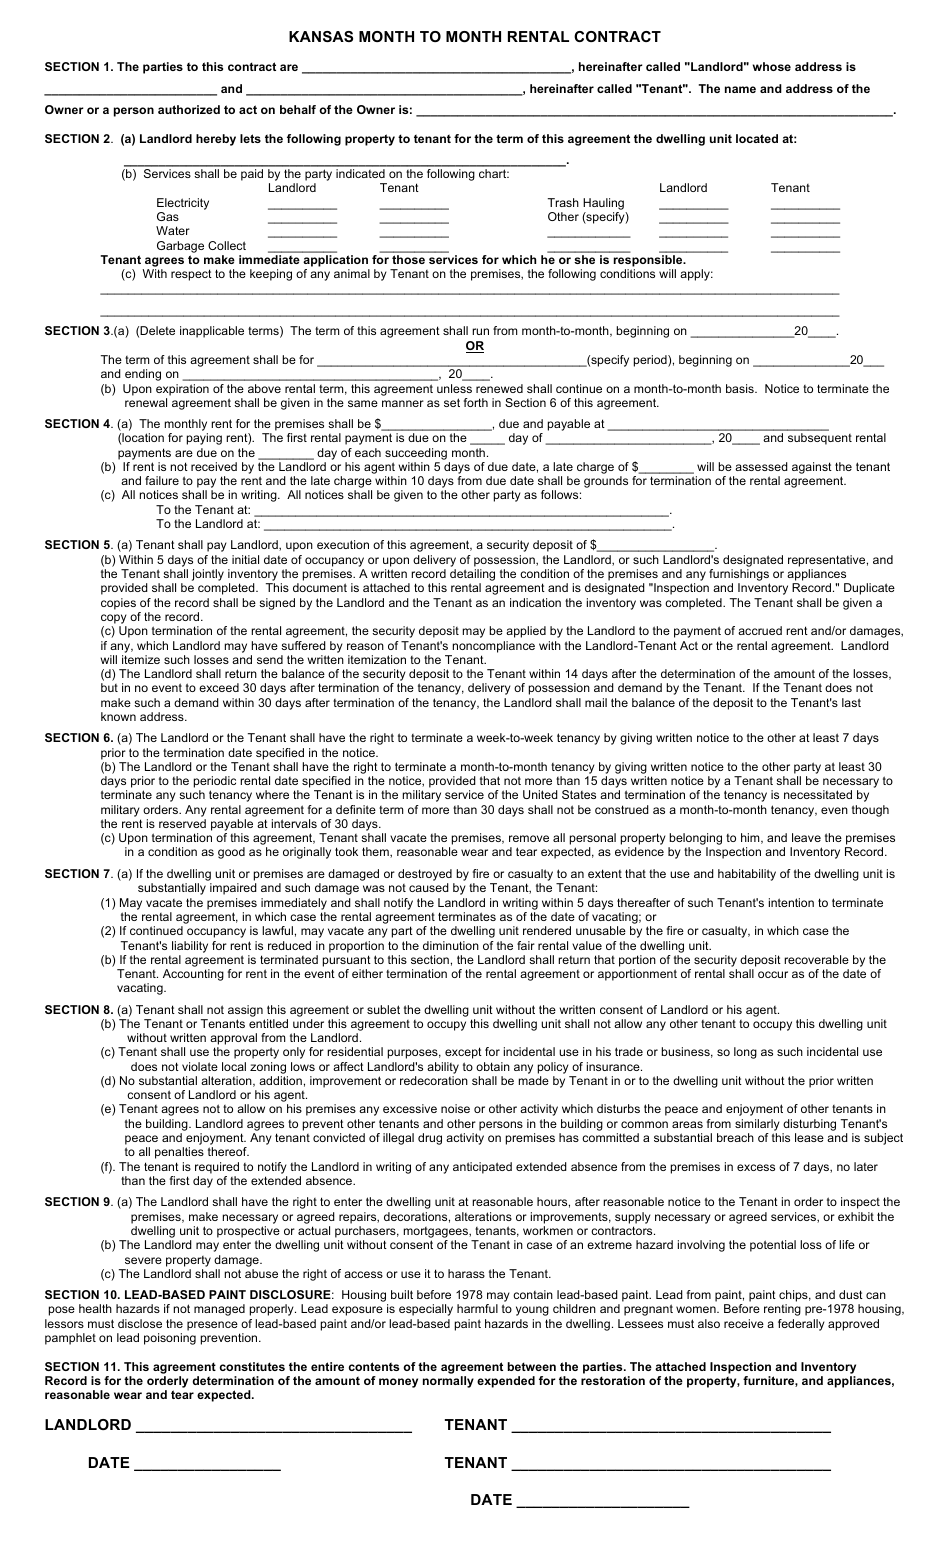 Month to Month Rental Contract Template - Kansas, Page 1